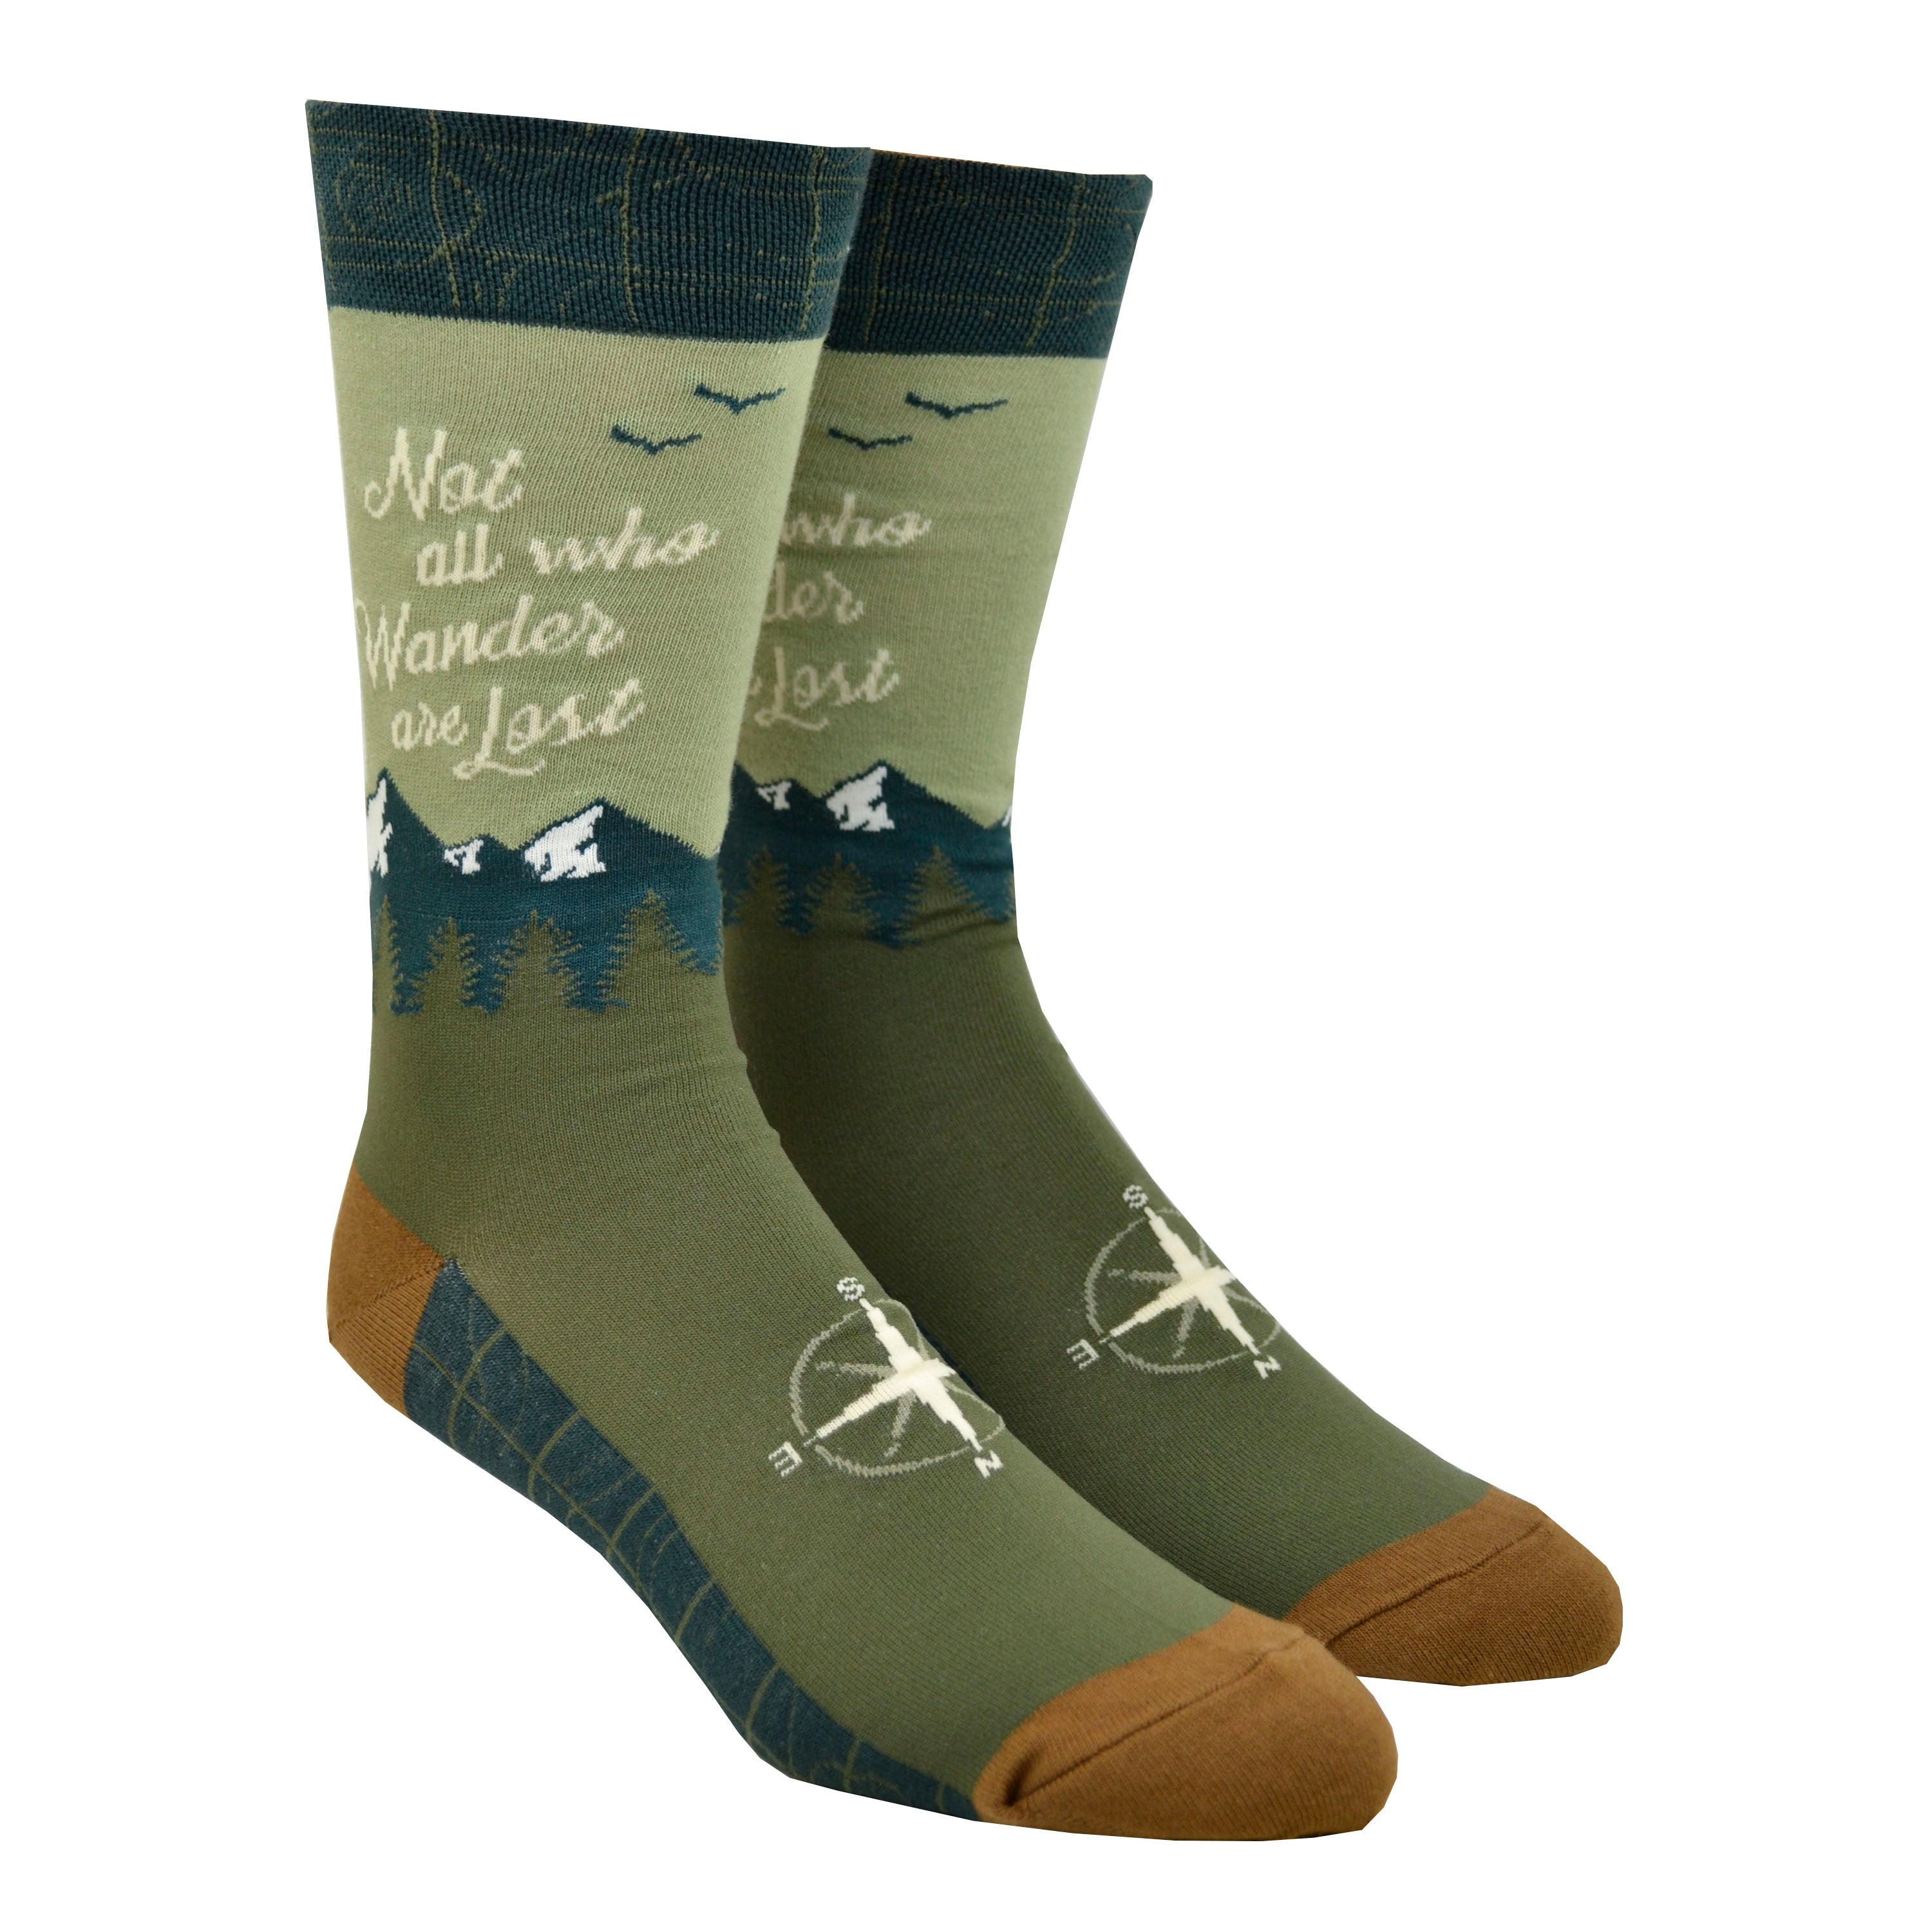 Shown on leg forms, a pair of men's Foot Traffic brand cotton crew socks with a dark blue cuff, green heel, and mustard toe. The leg of this sock is light green with a blue mountain rage and the words, 